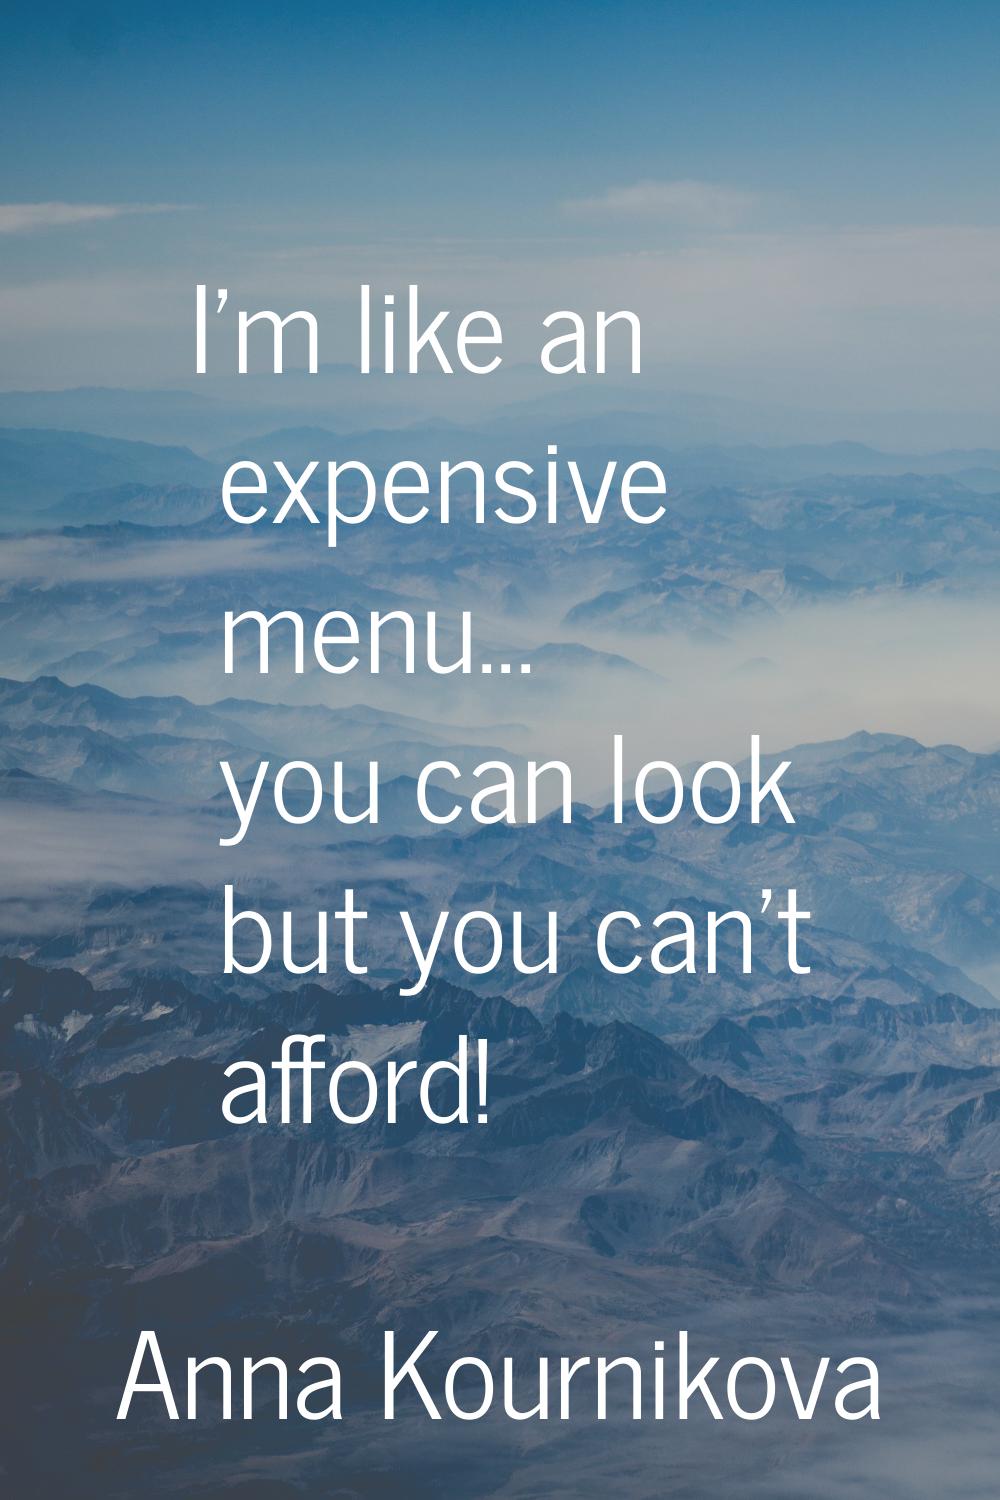 I'm like an expensive menu... you can look but you can't afford!